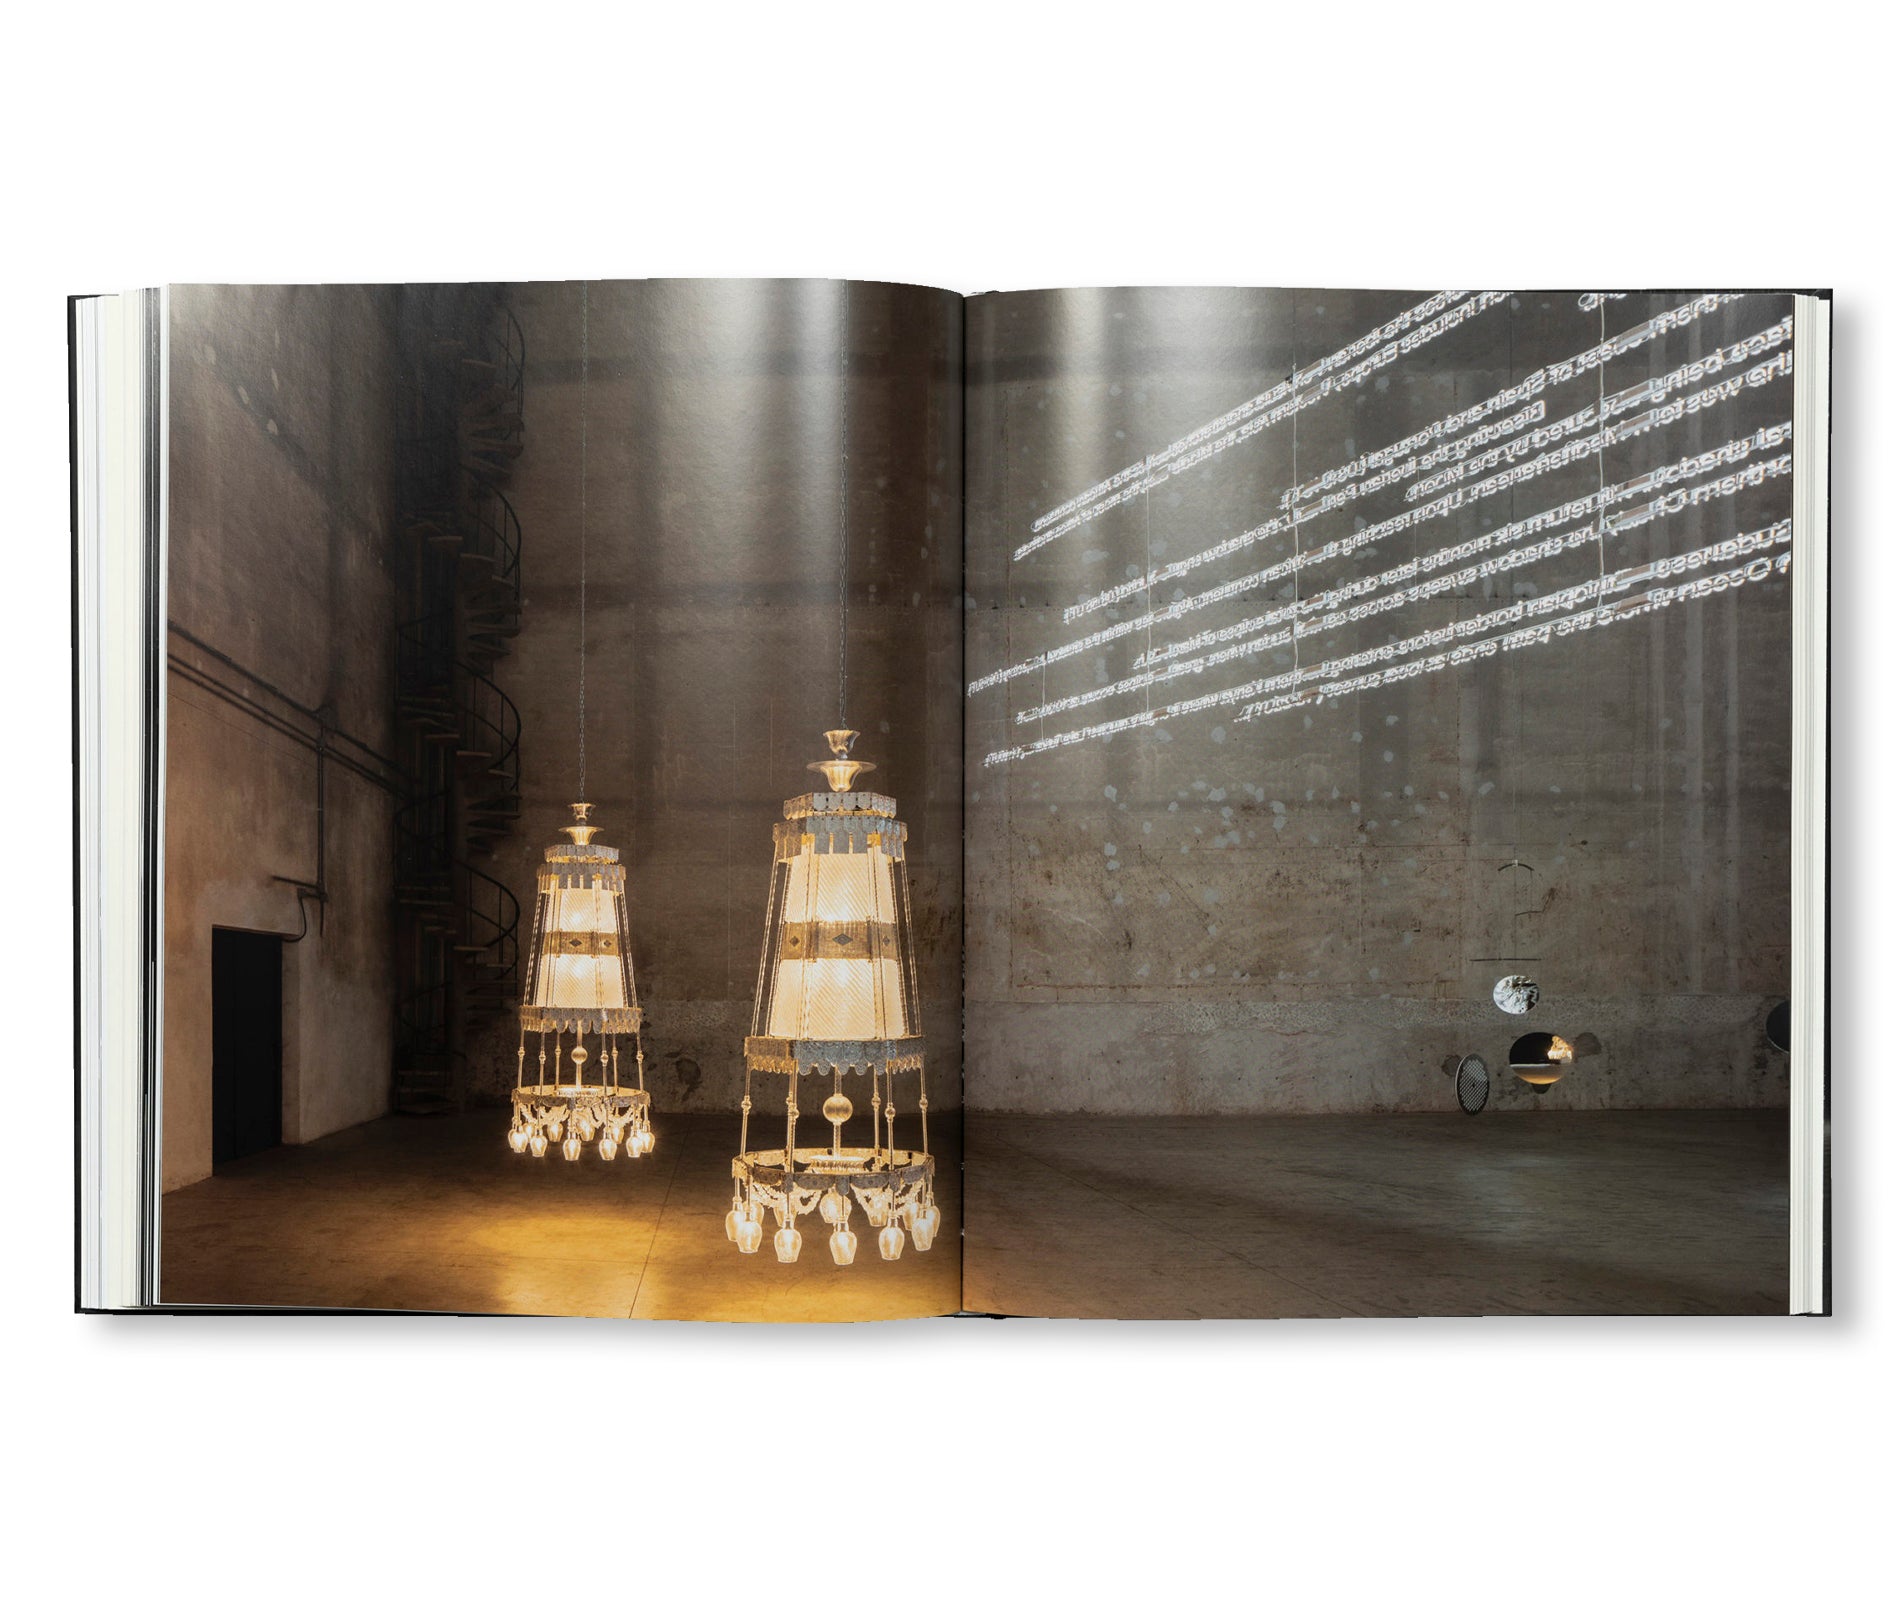 THE ILLUMINATING GAS by Cerith Wyn Evans